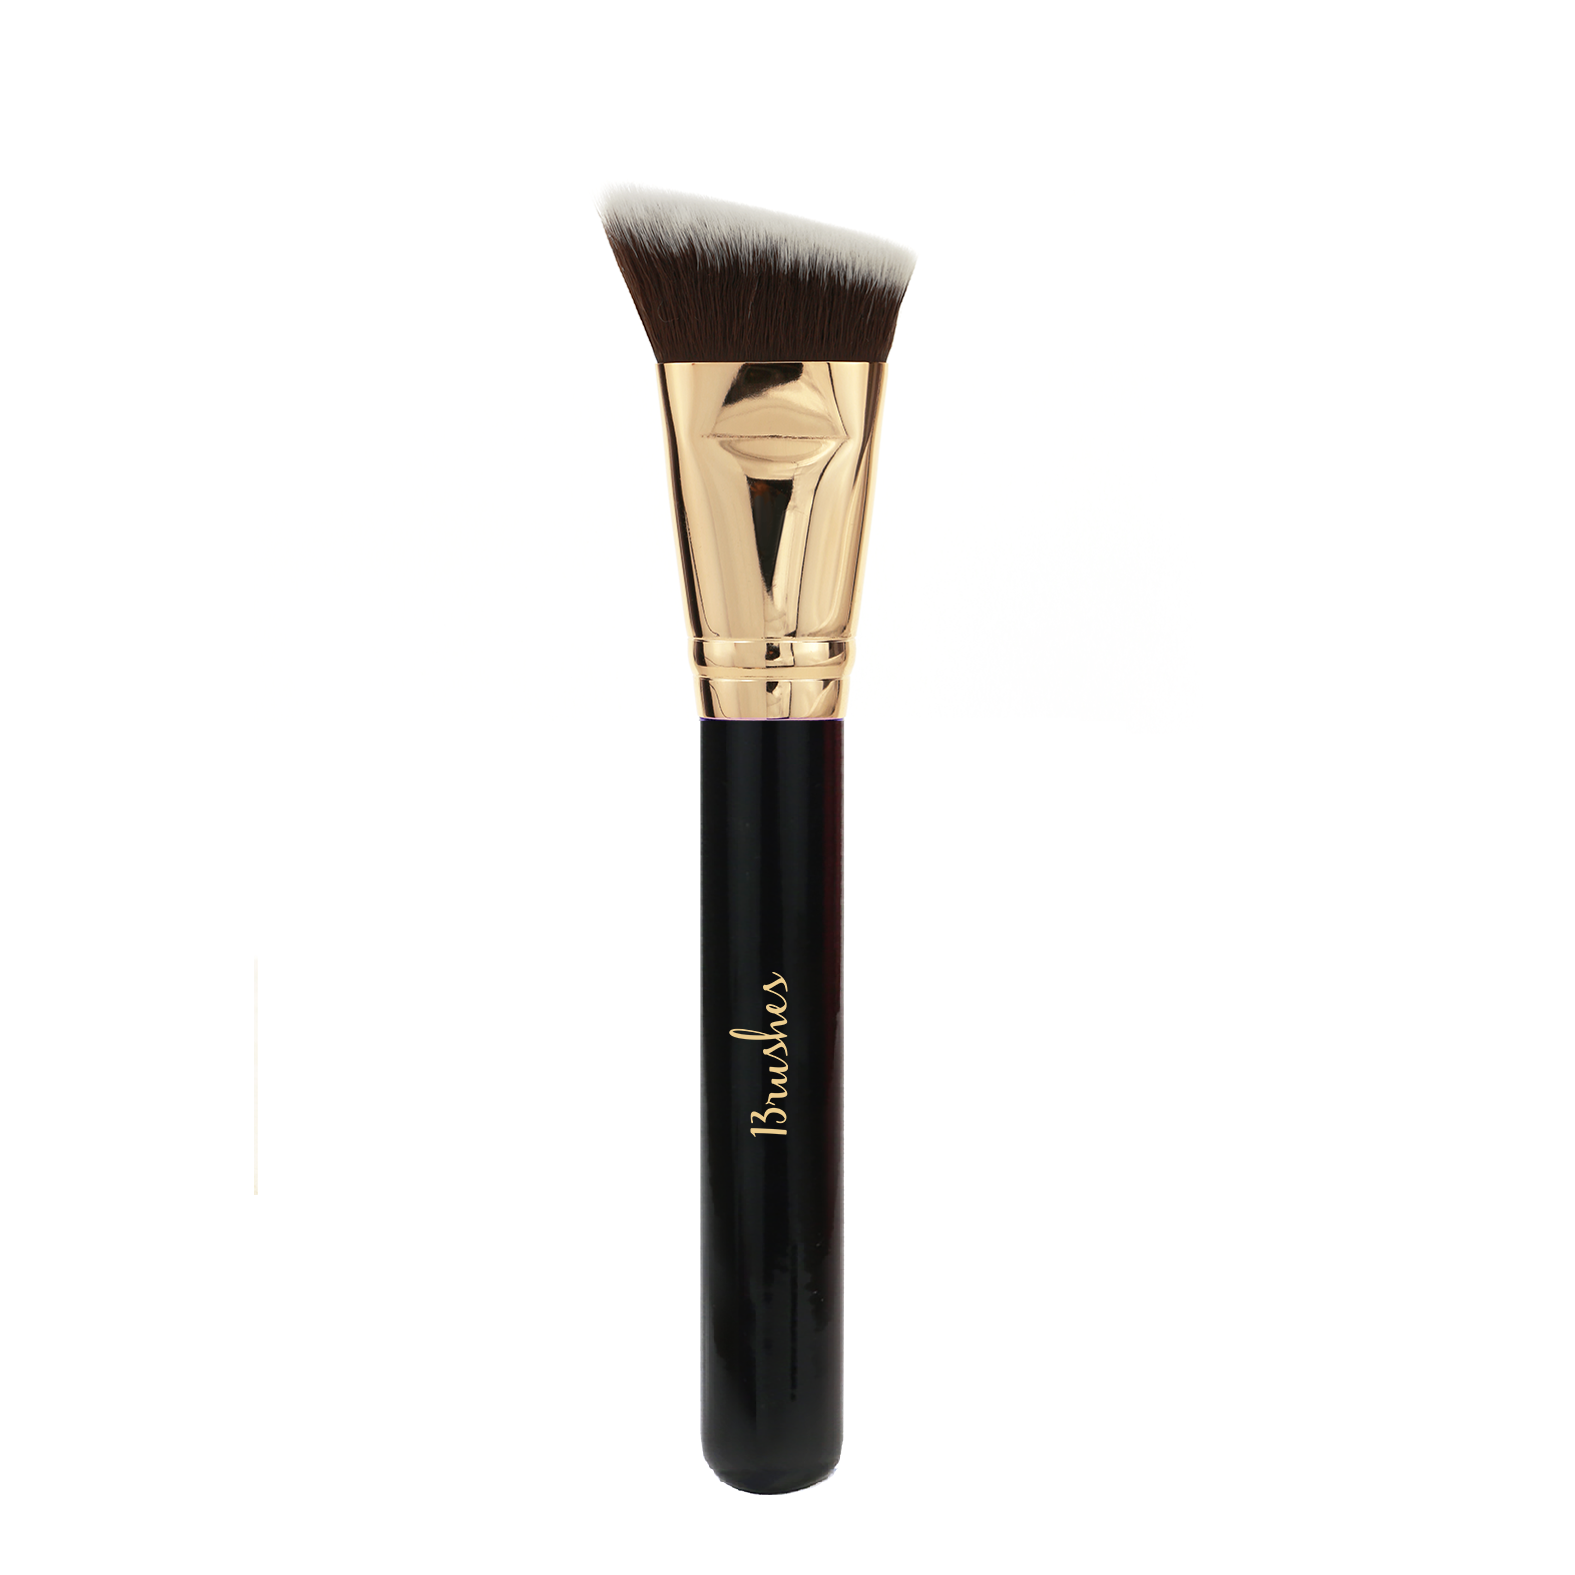 Angled Sculpting - 13rushes - Singapore's best makeup brushes